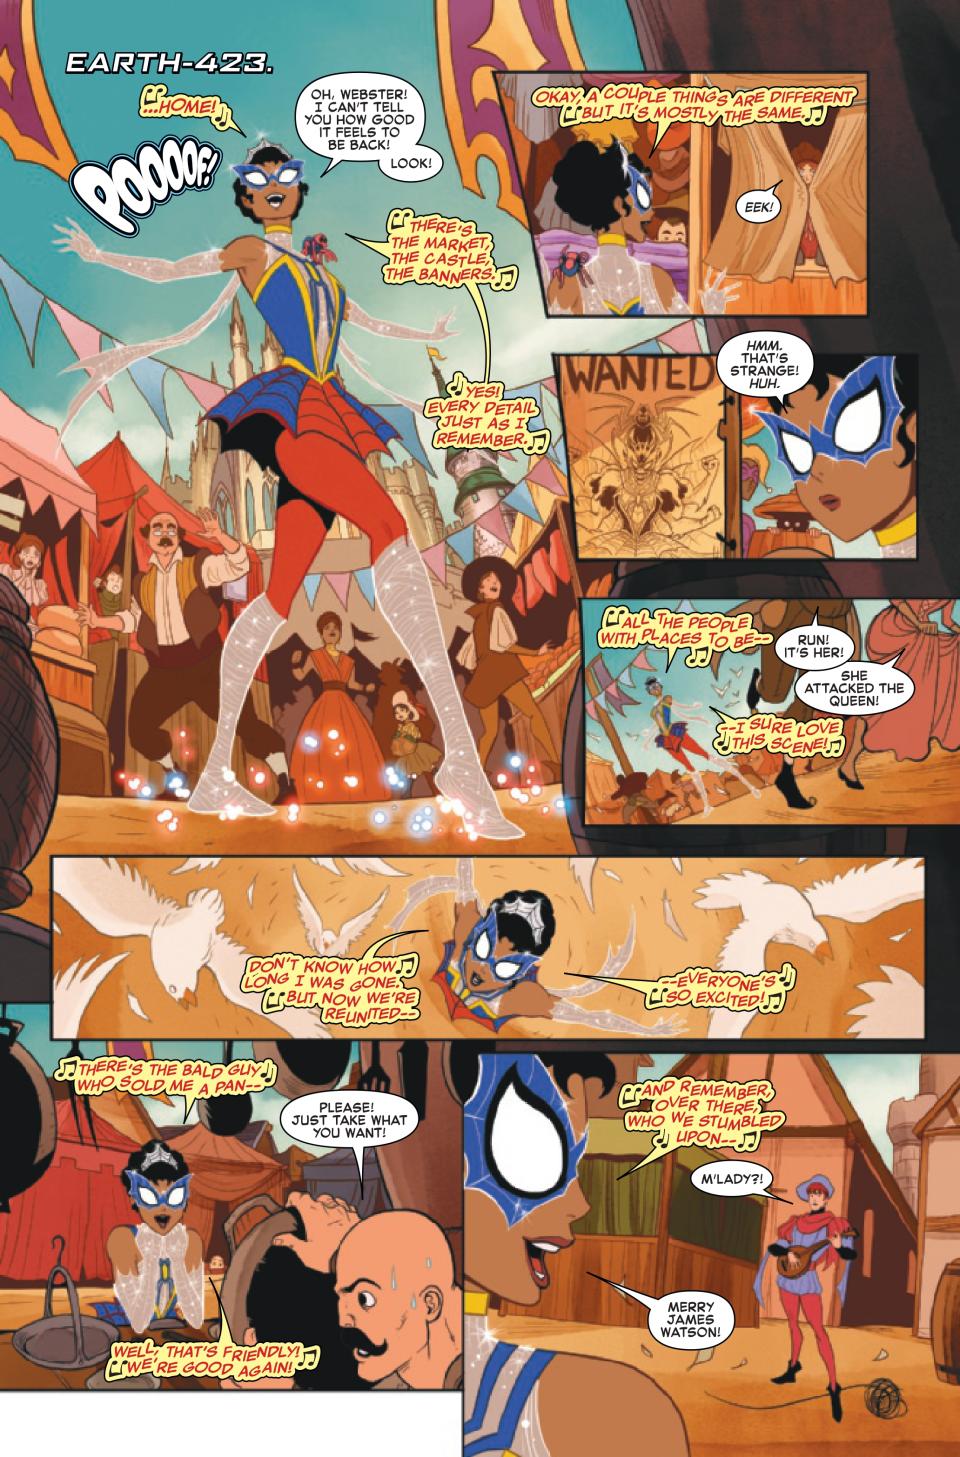 Pages from Edge of Spider-Verse #4.